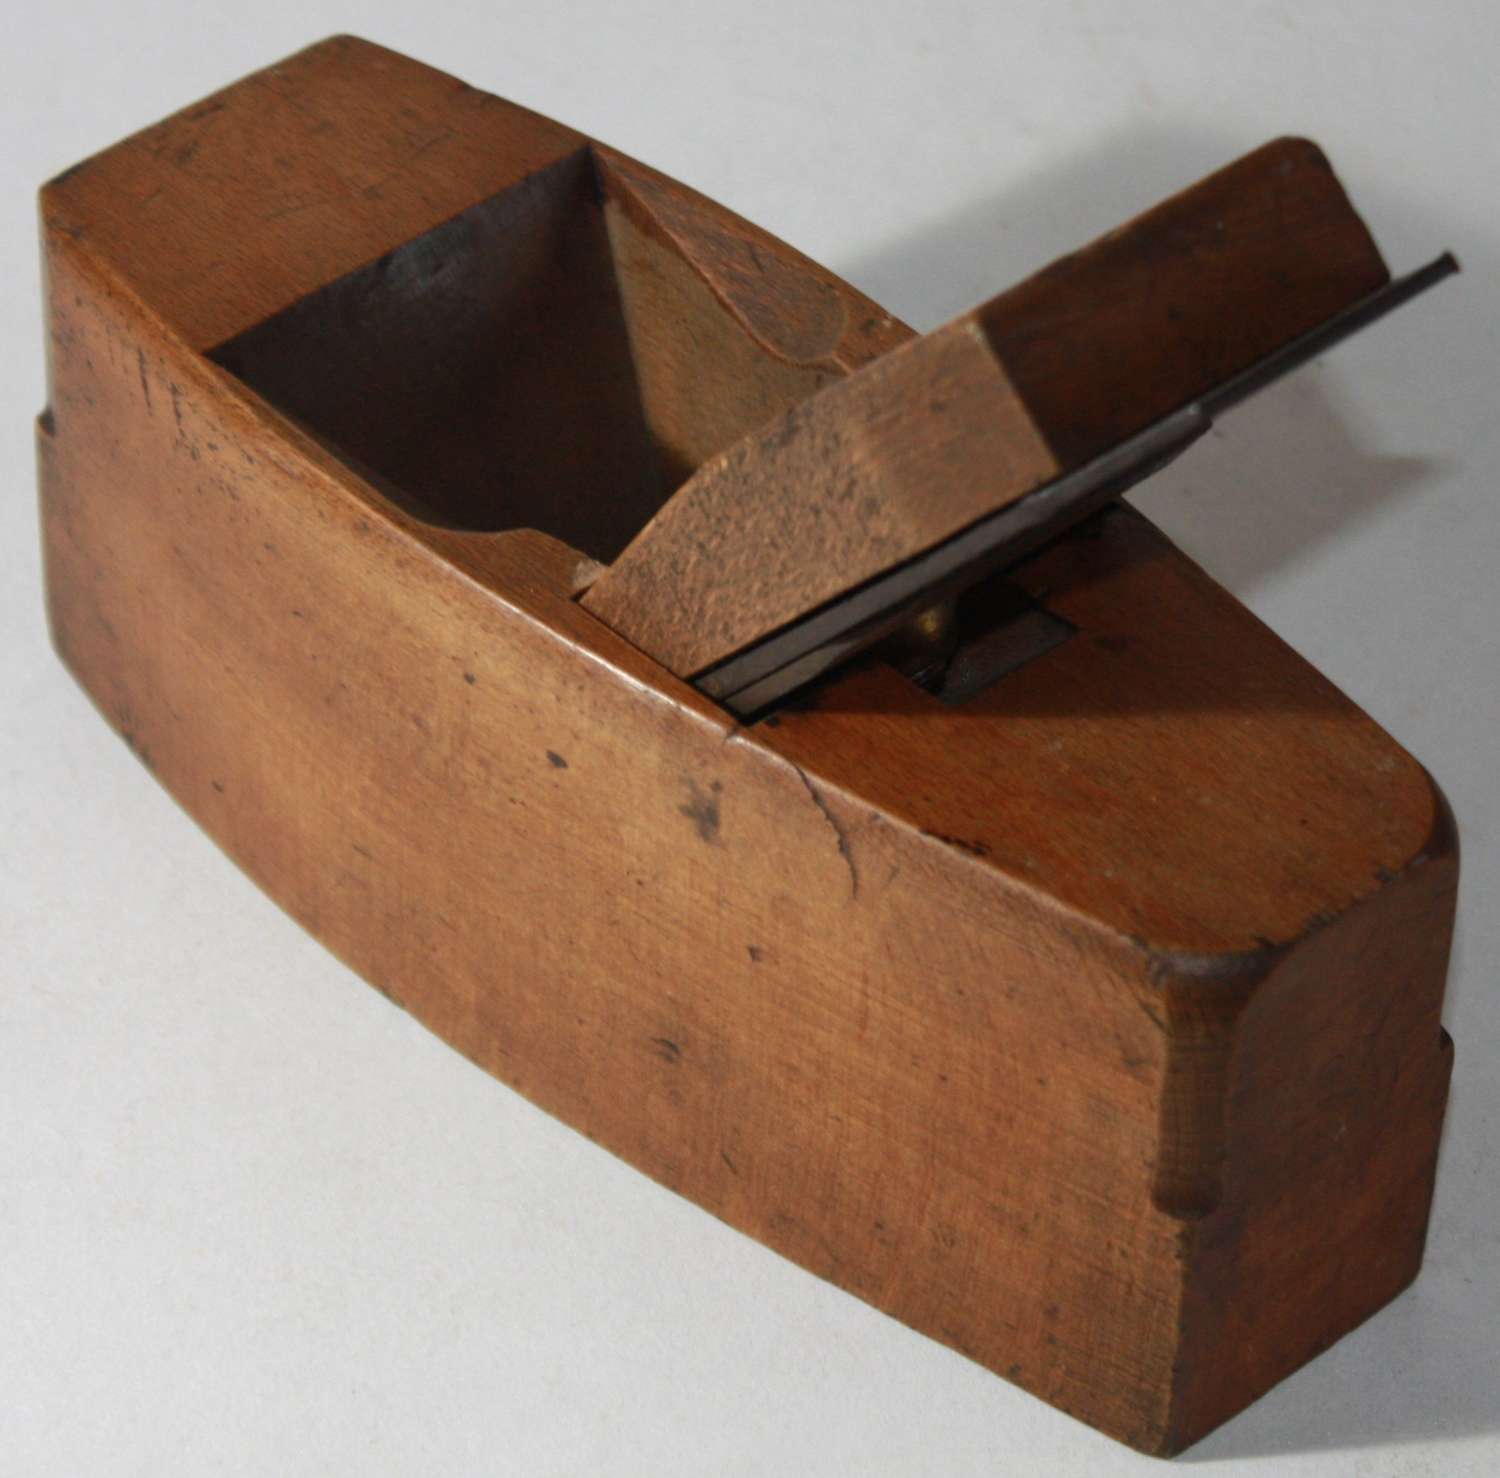 A 1943 DATED WOOD PLANE